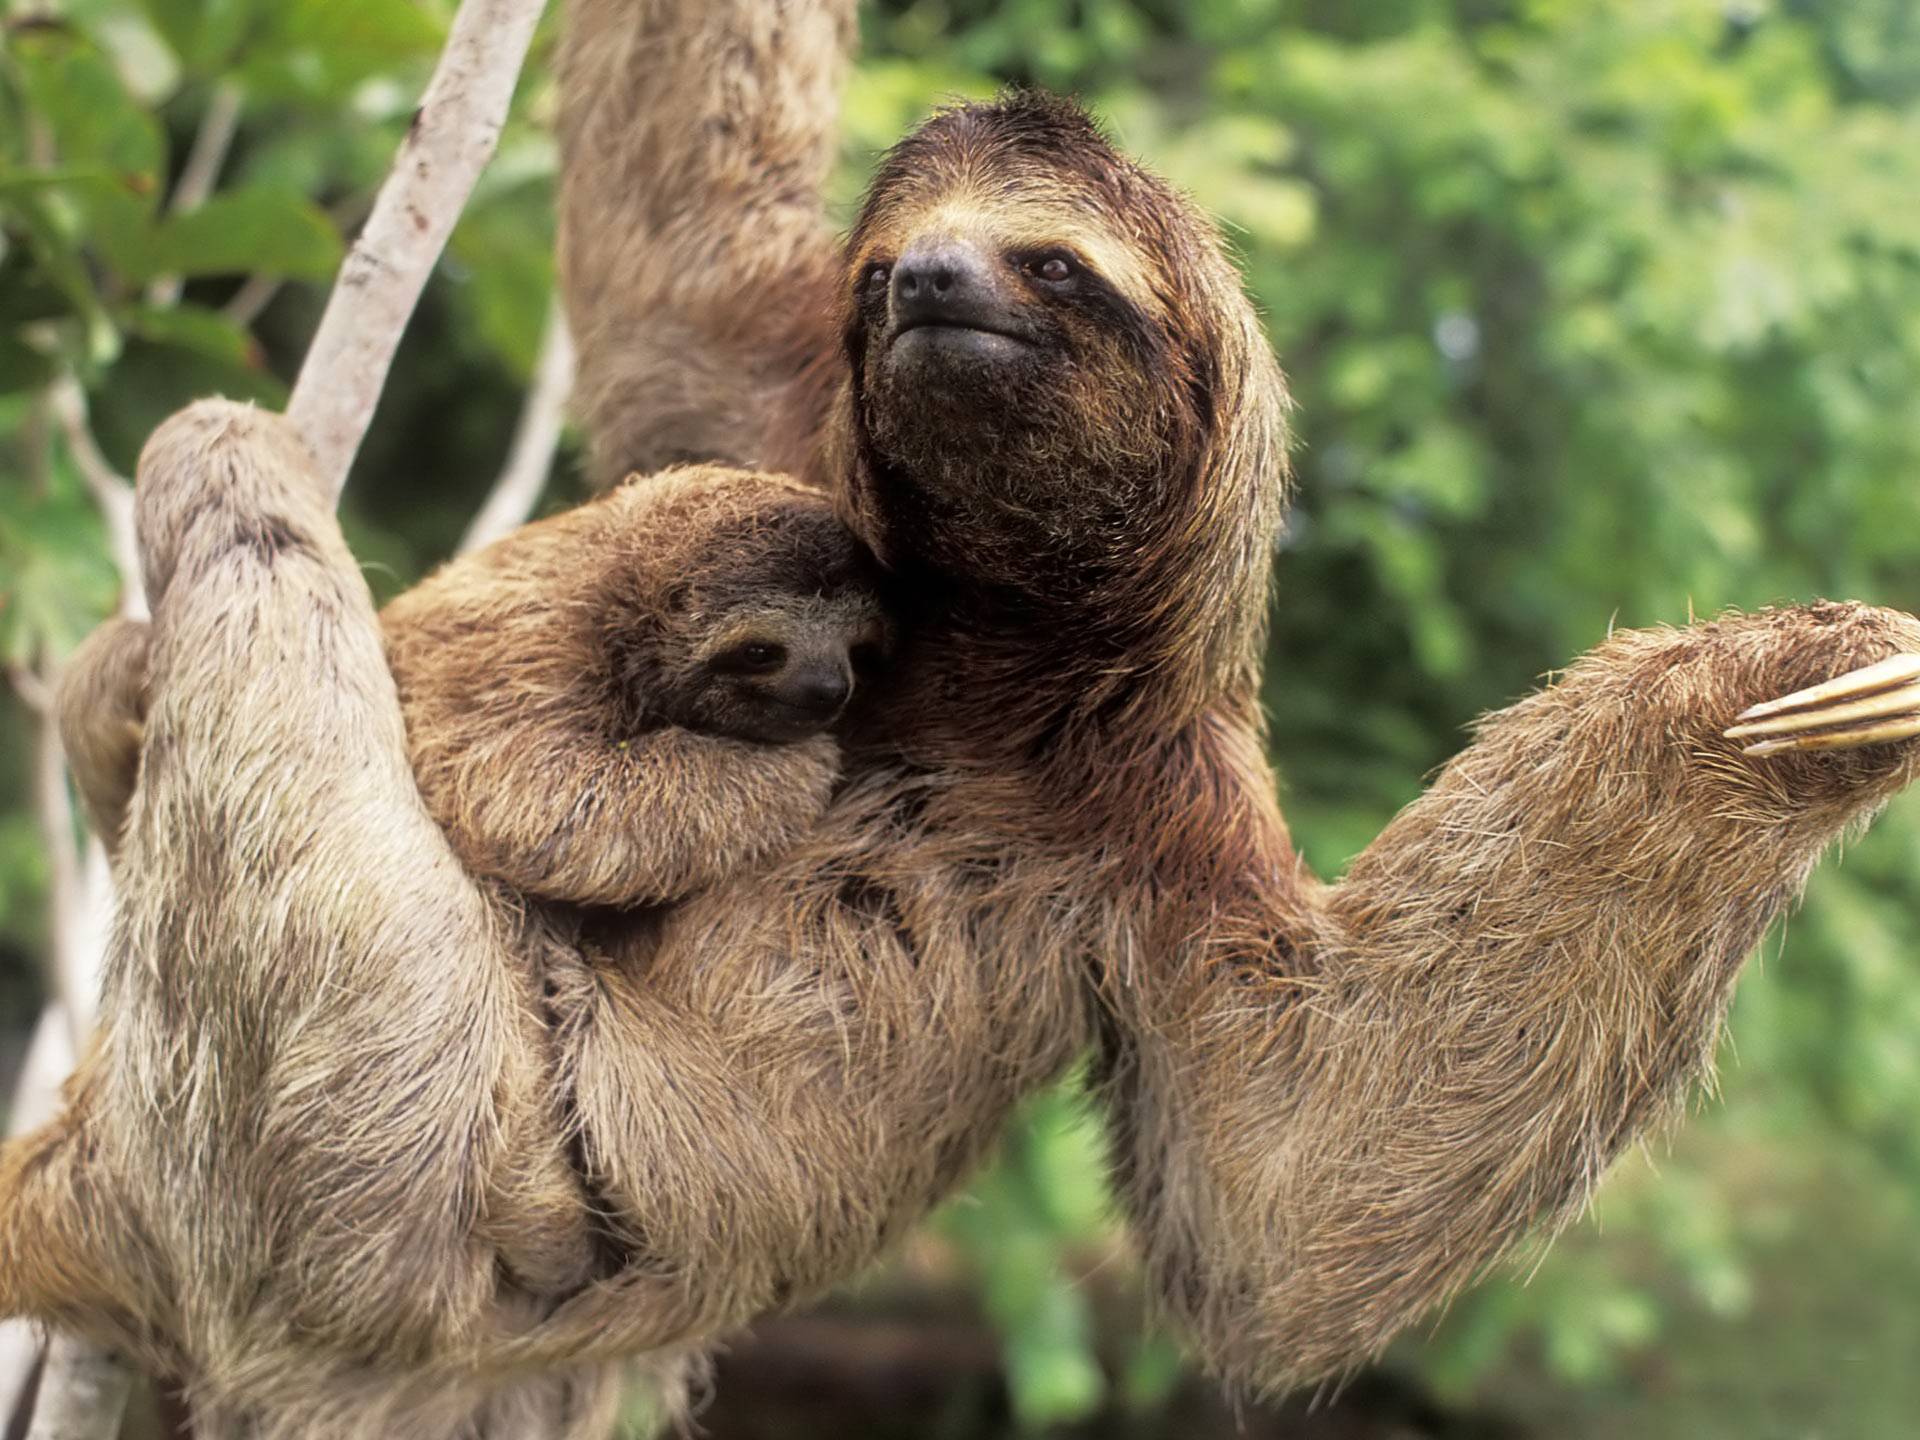 Is A Sloth D This Great Wallpaper I Think Its Really Cute